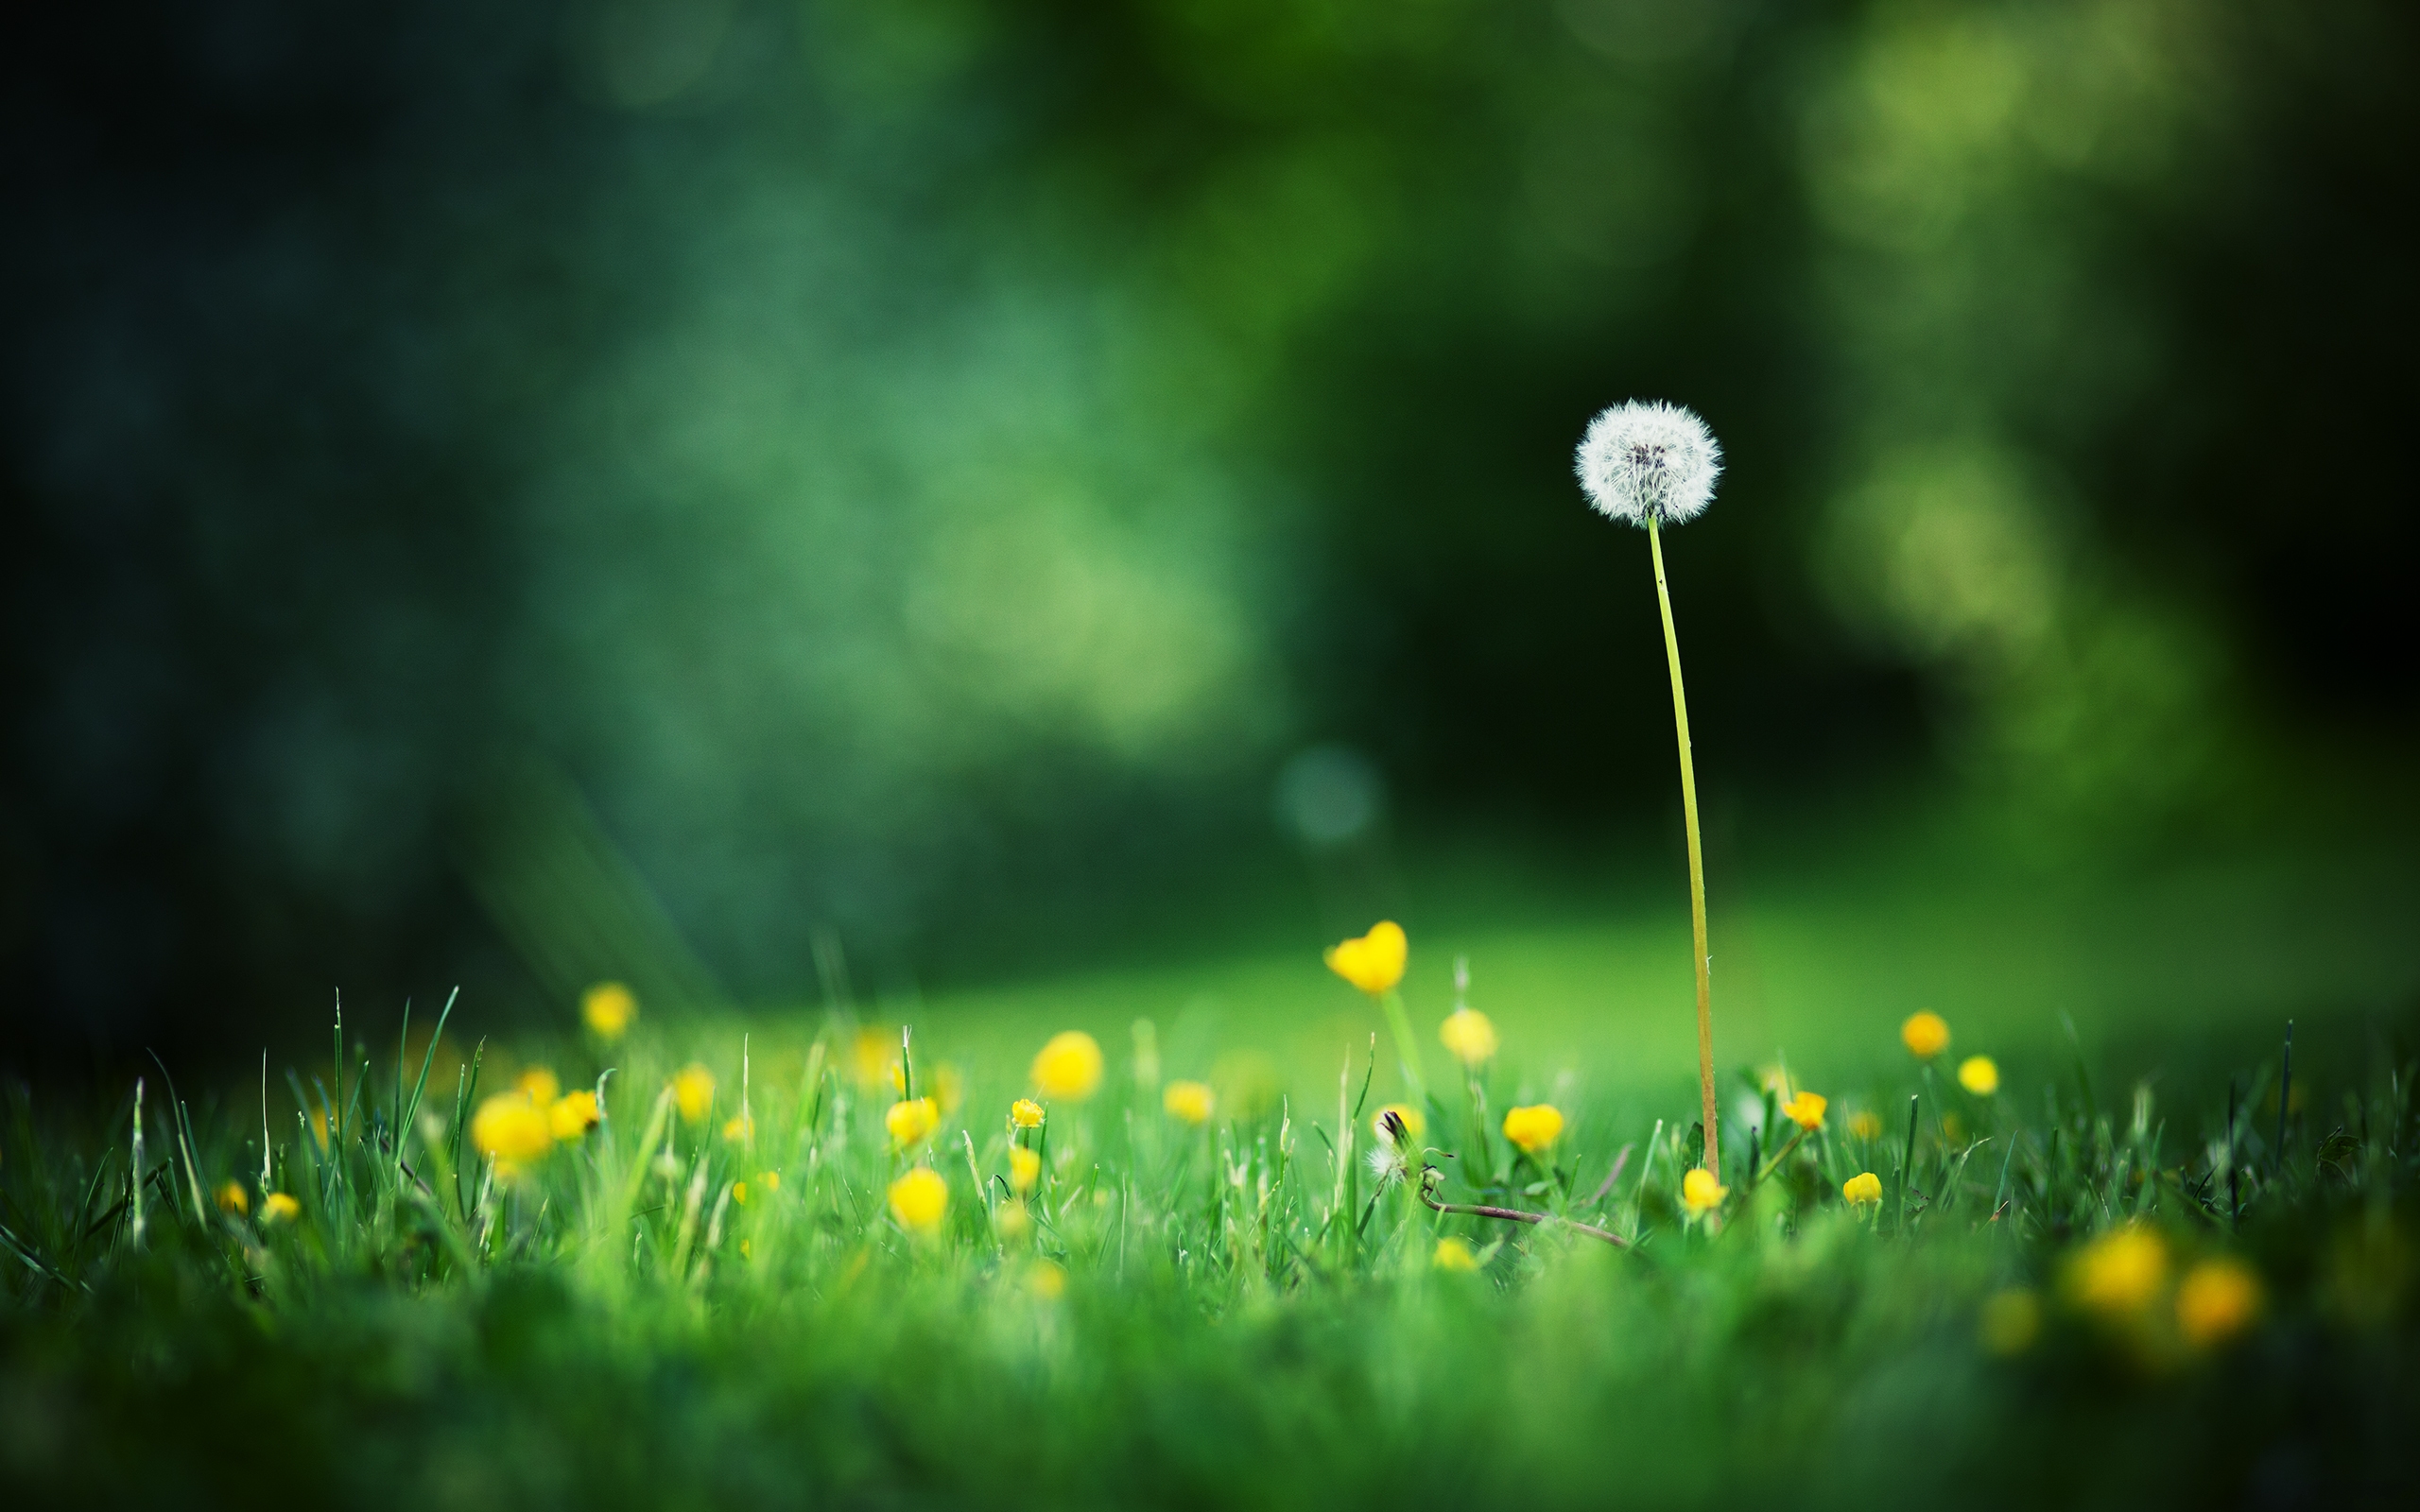 Daily featured wallpaper - Dandelion | HD Wallpapers